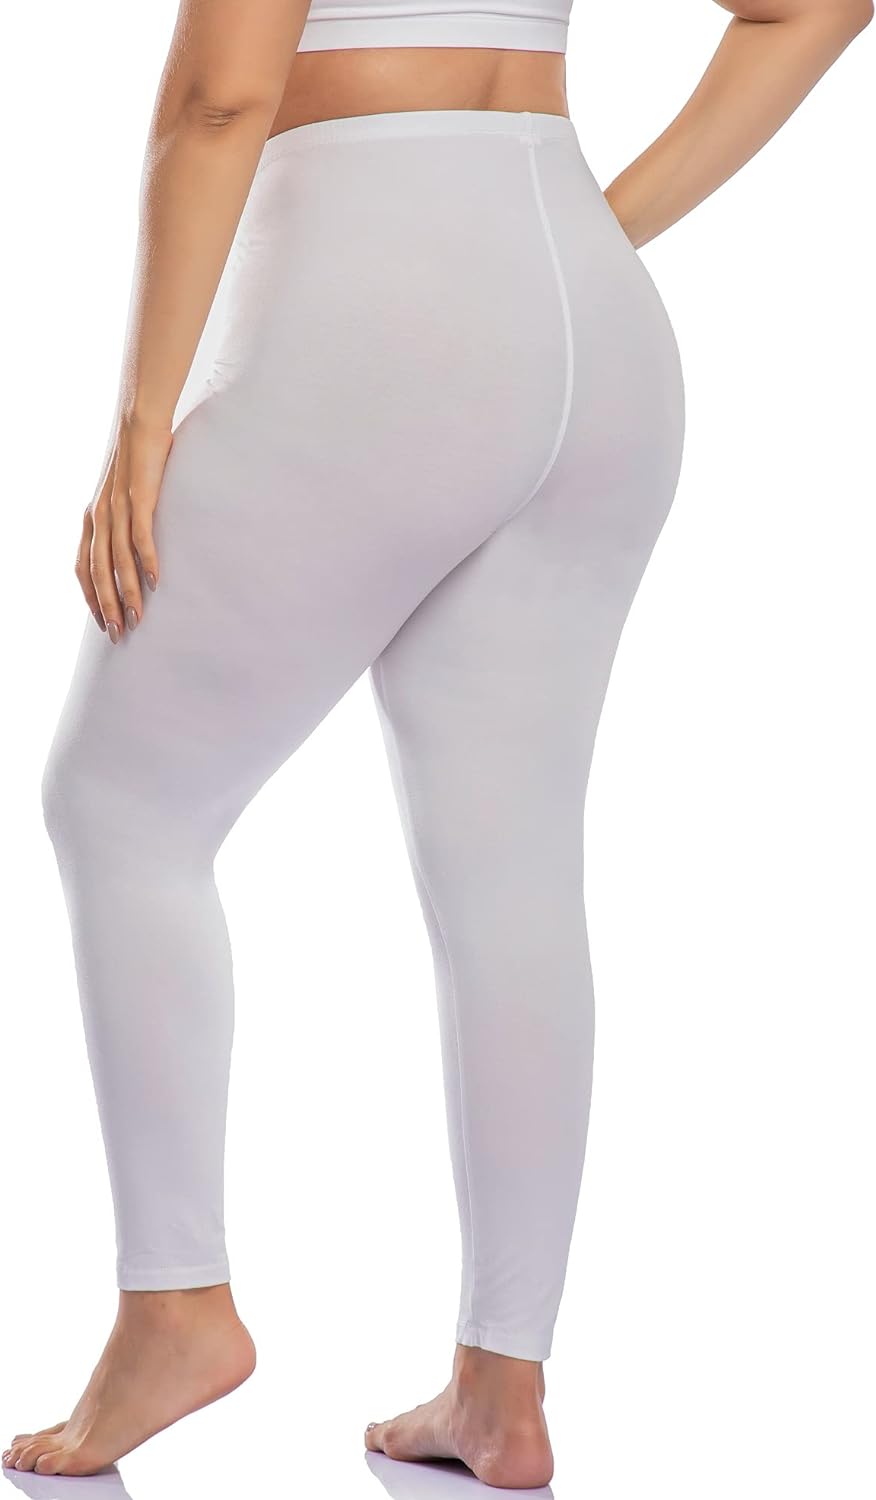 A-Wintage Womens Plus Size Ankle Length Leggings Buttery Soft High Waist Leggings Lightweight Workout Yoga Pants